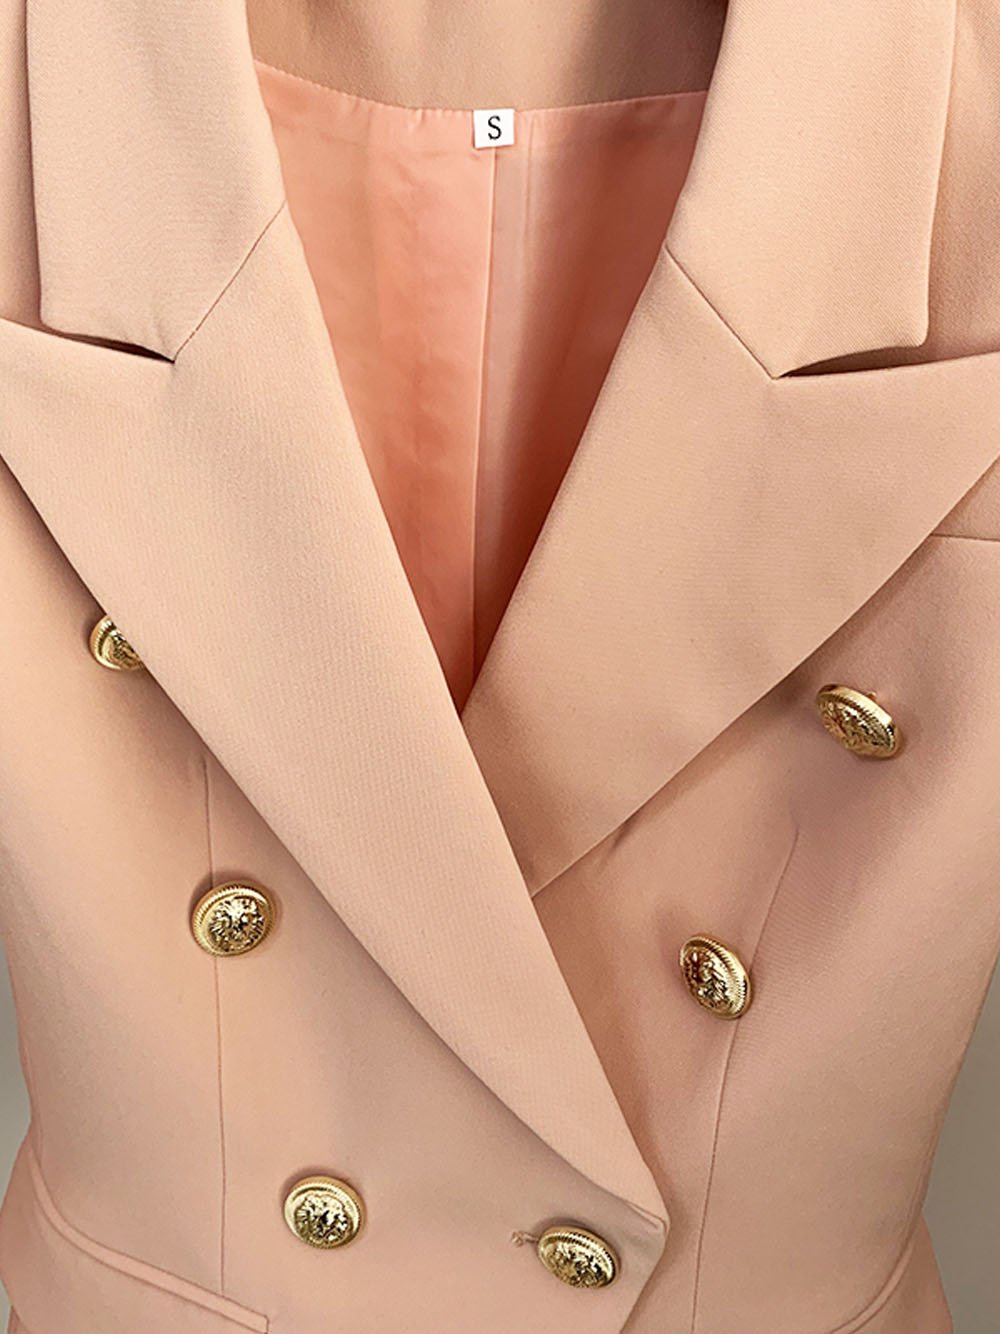 Double Breasted Blazer in Nude